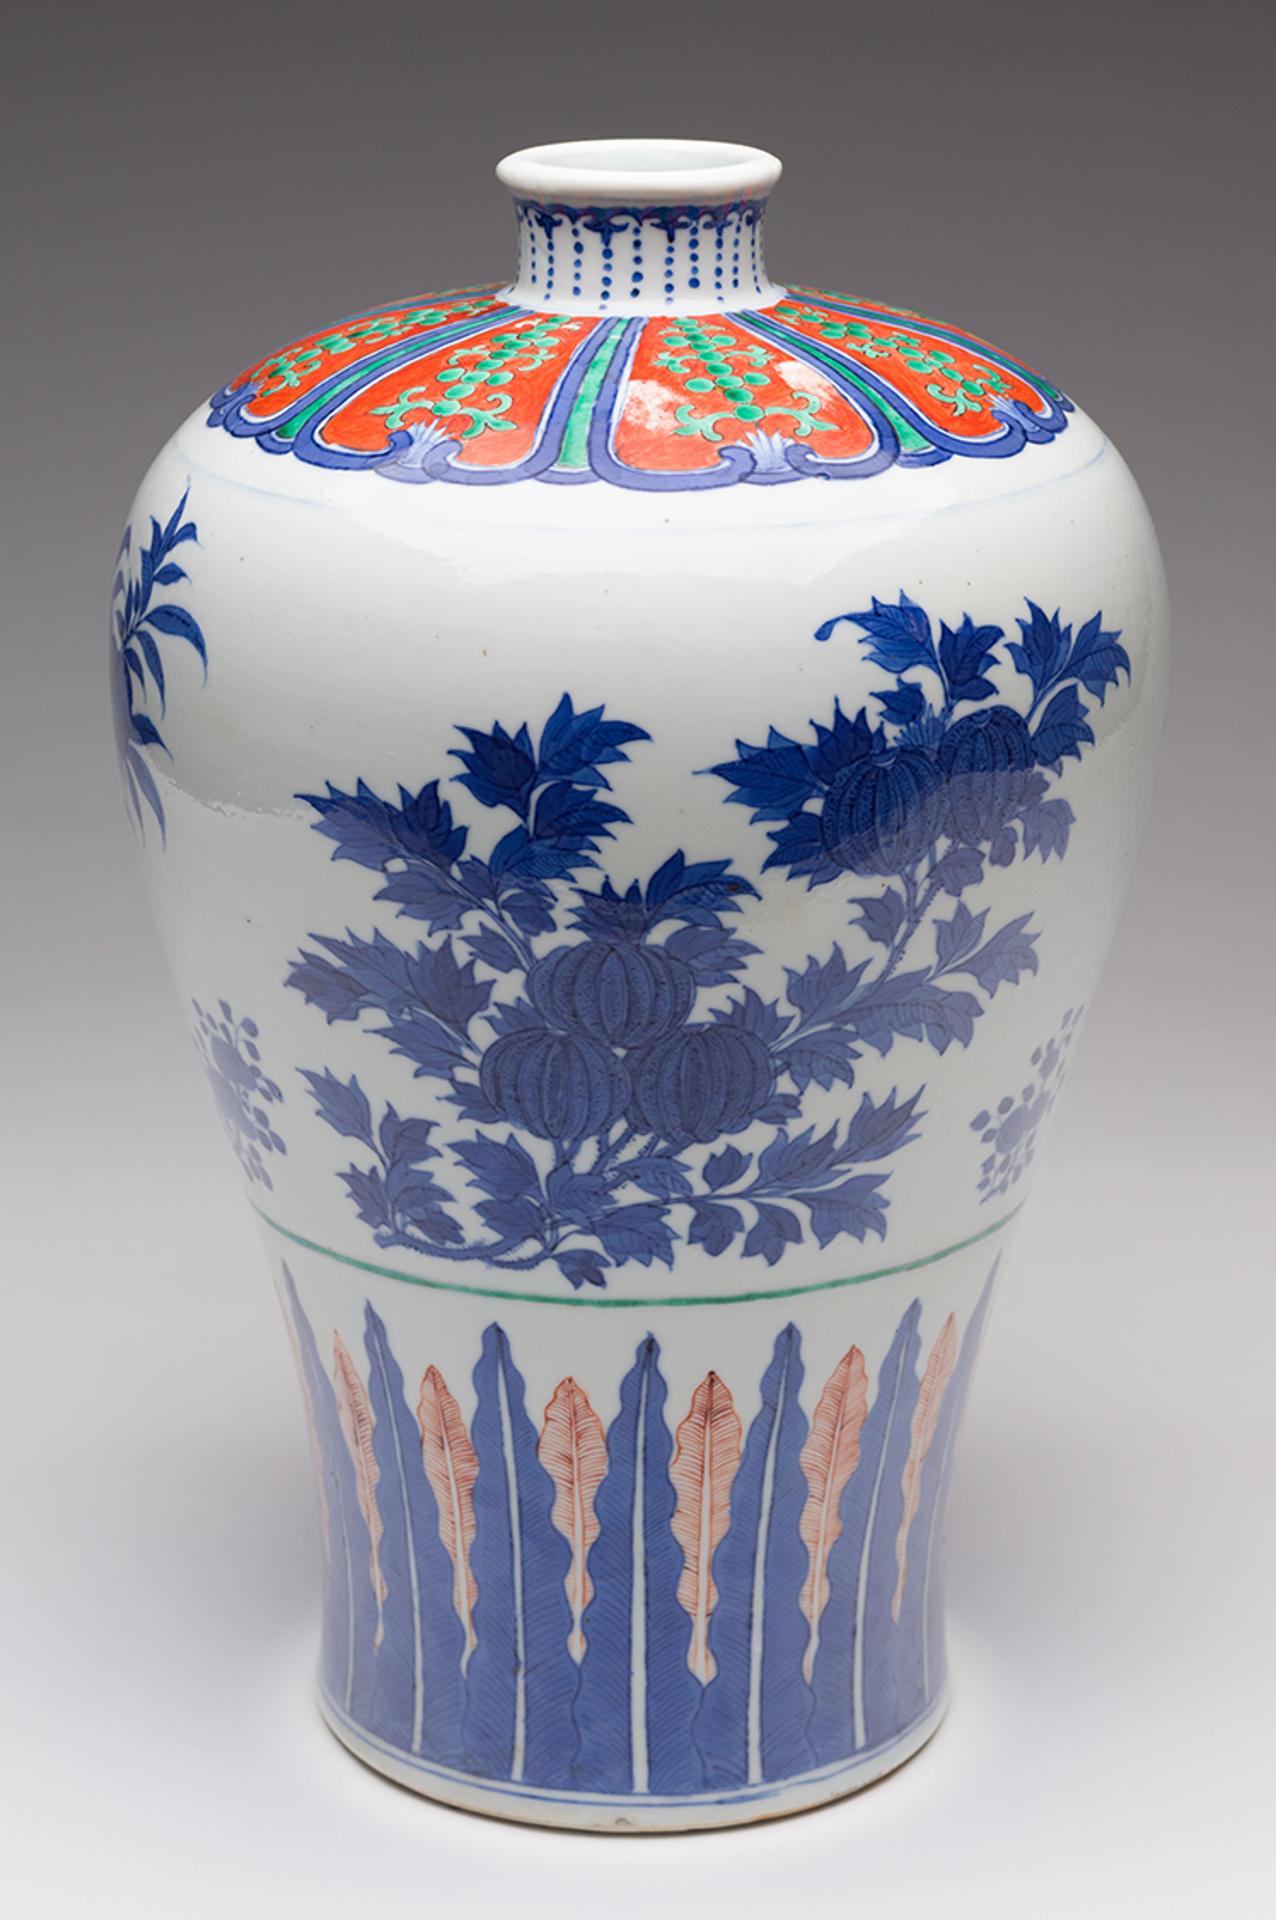 Chinese Art - An Unusual Chinese Doucai ‘Fruits’ Meiping Vase, Late Qing Dynasty